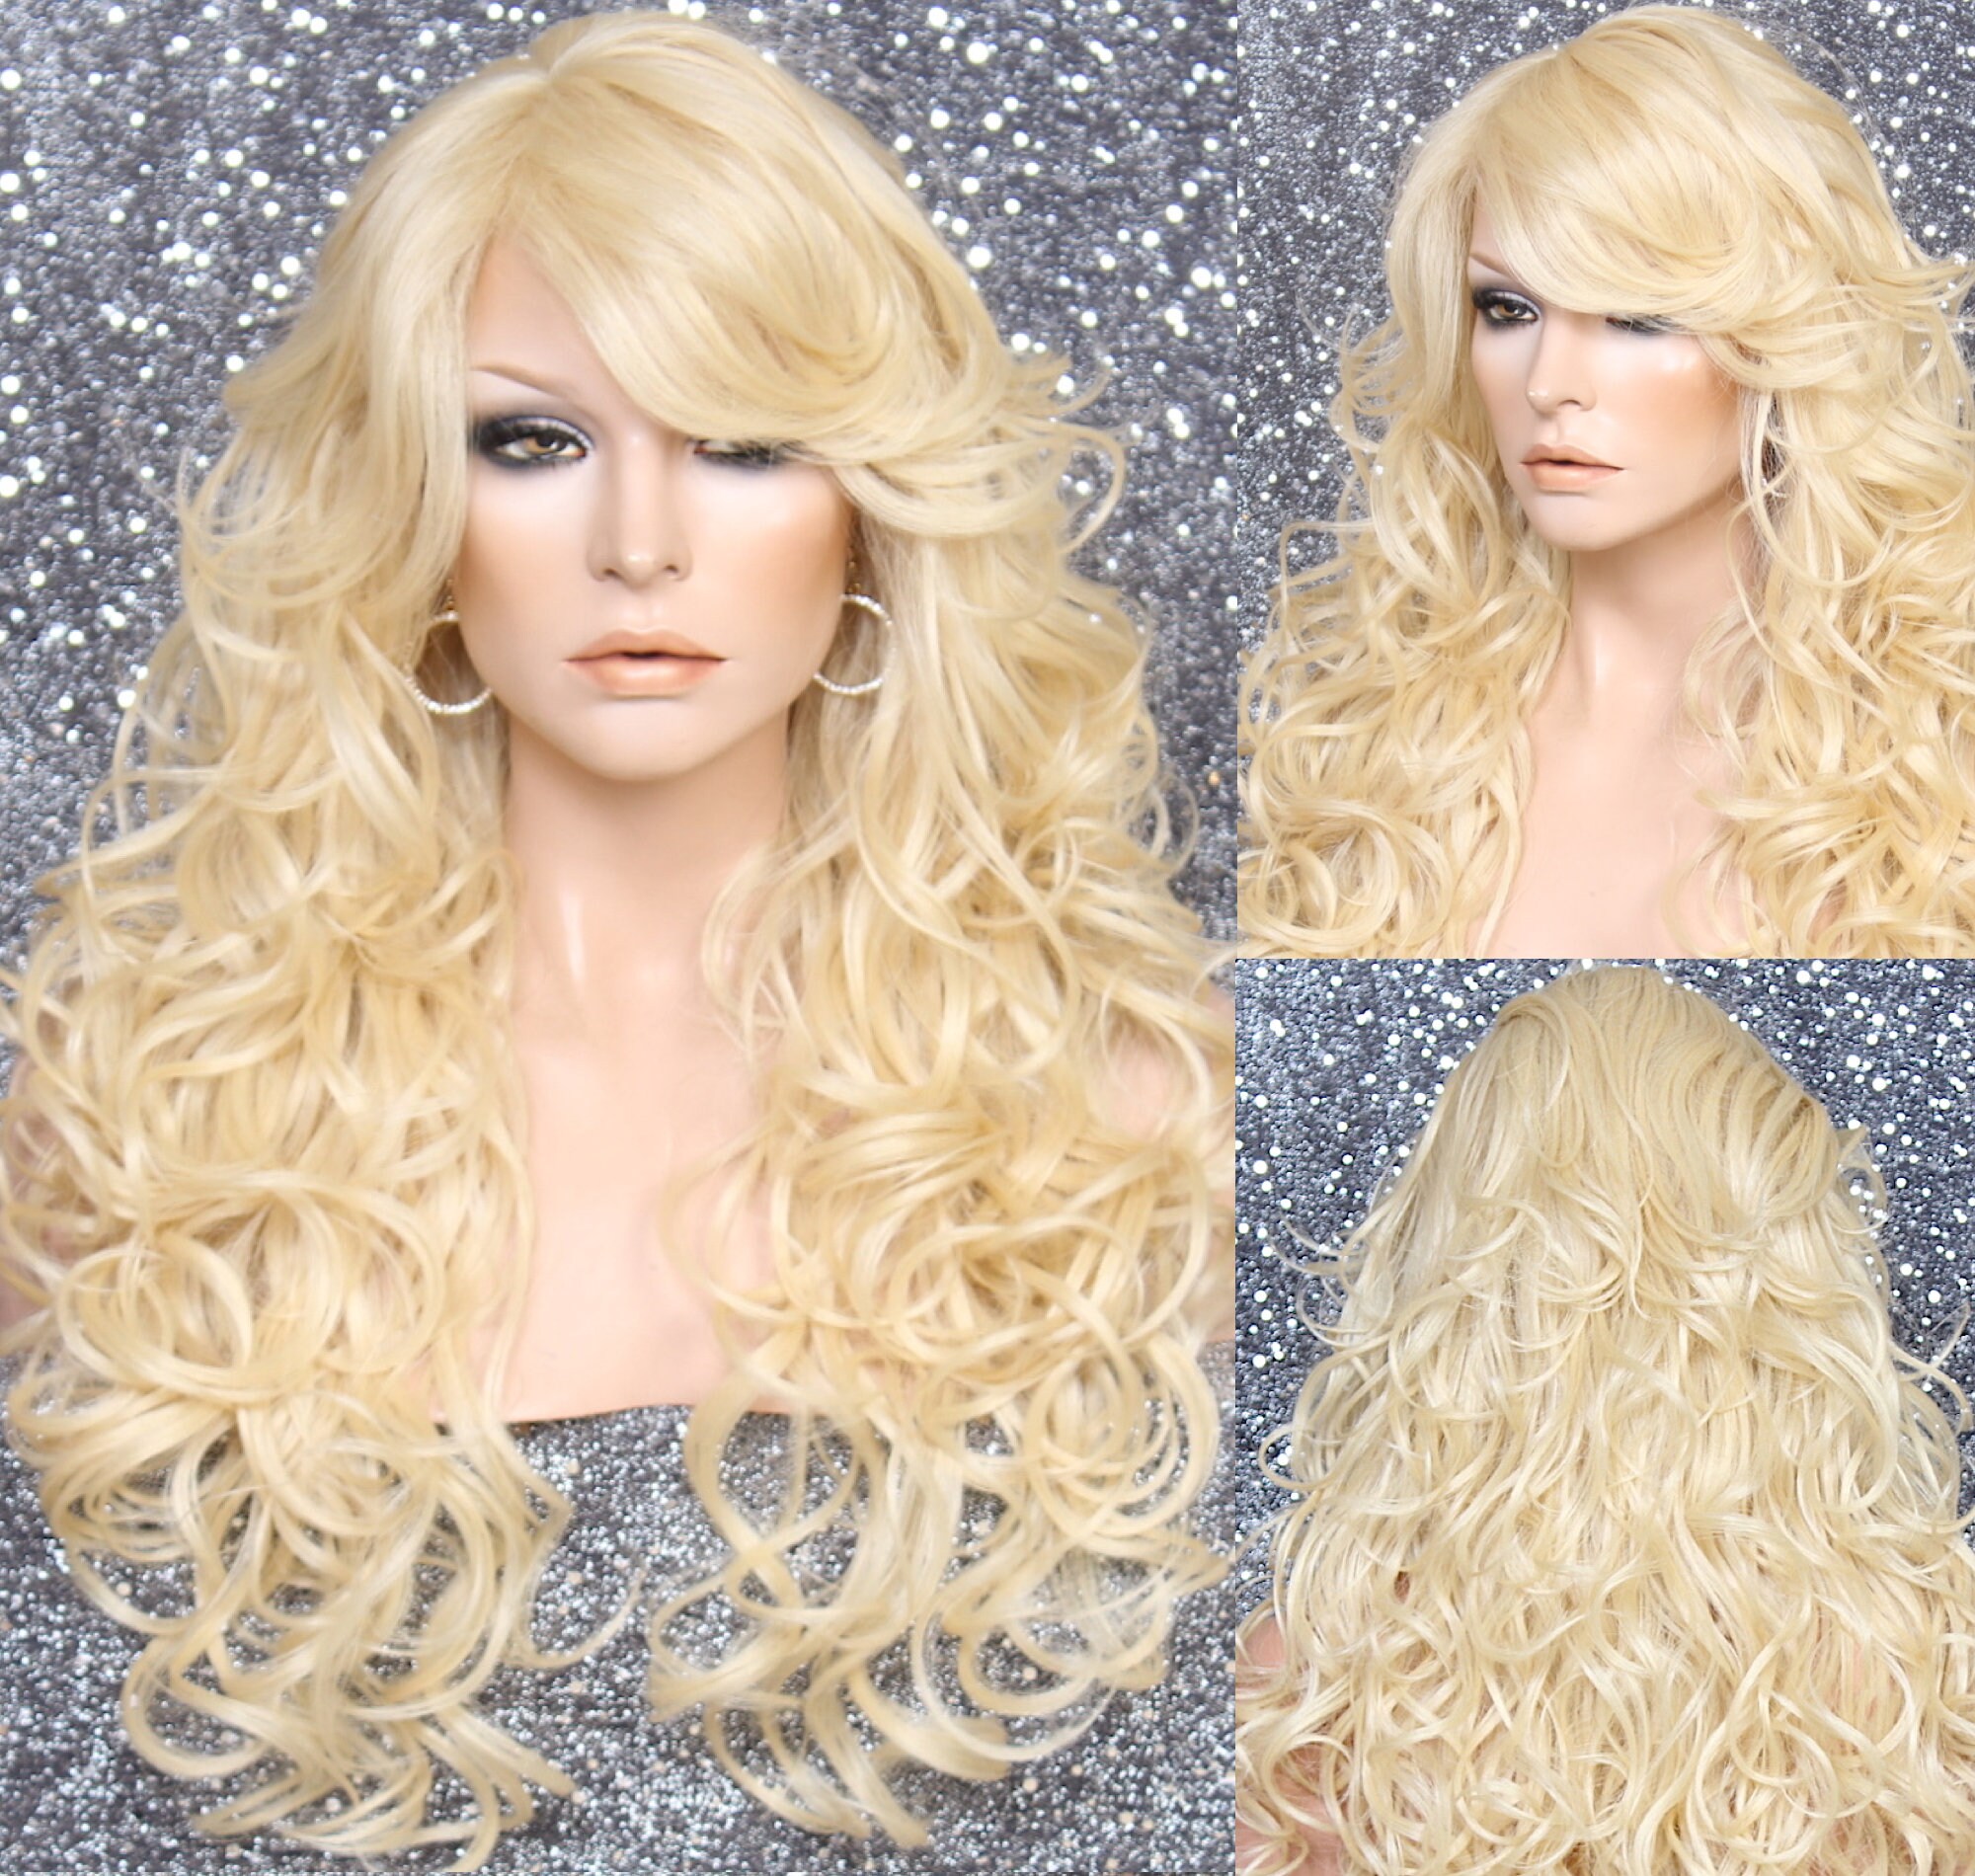 Bleach Blonde Beautiful Human Hair Blend Curly Wig With Full Bangs Heat Ok Perect For First Time Wearer Or Cancer/Alopecia/Cosplay/Theater